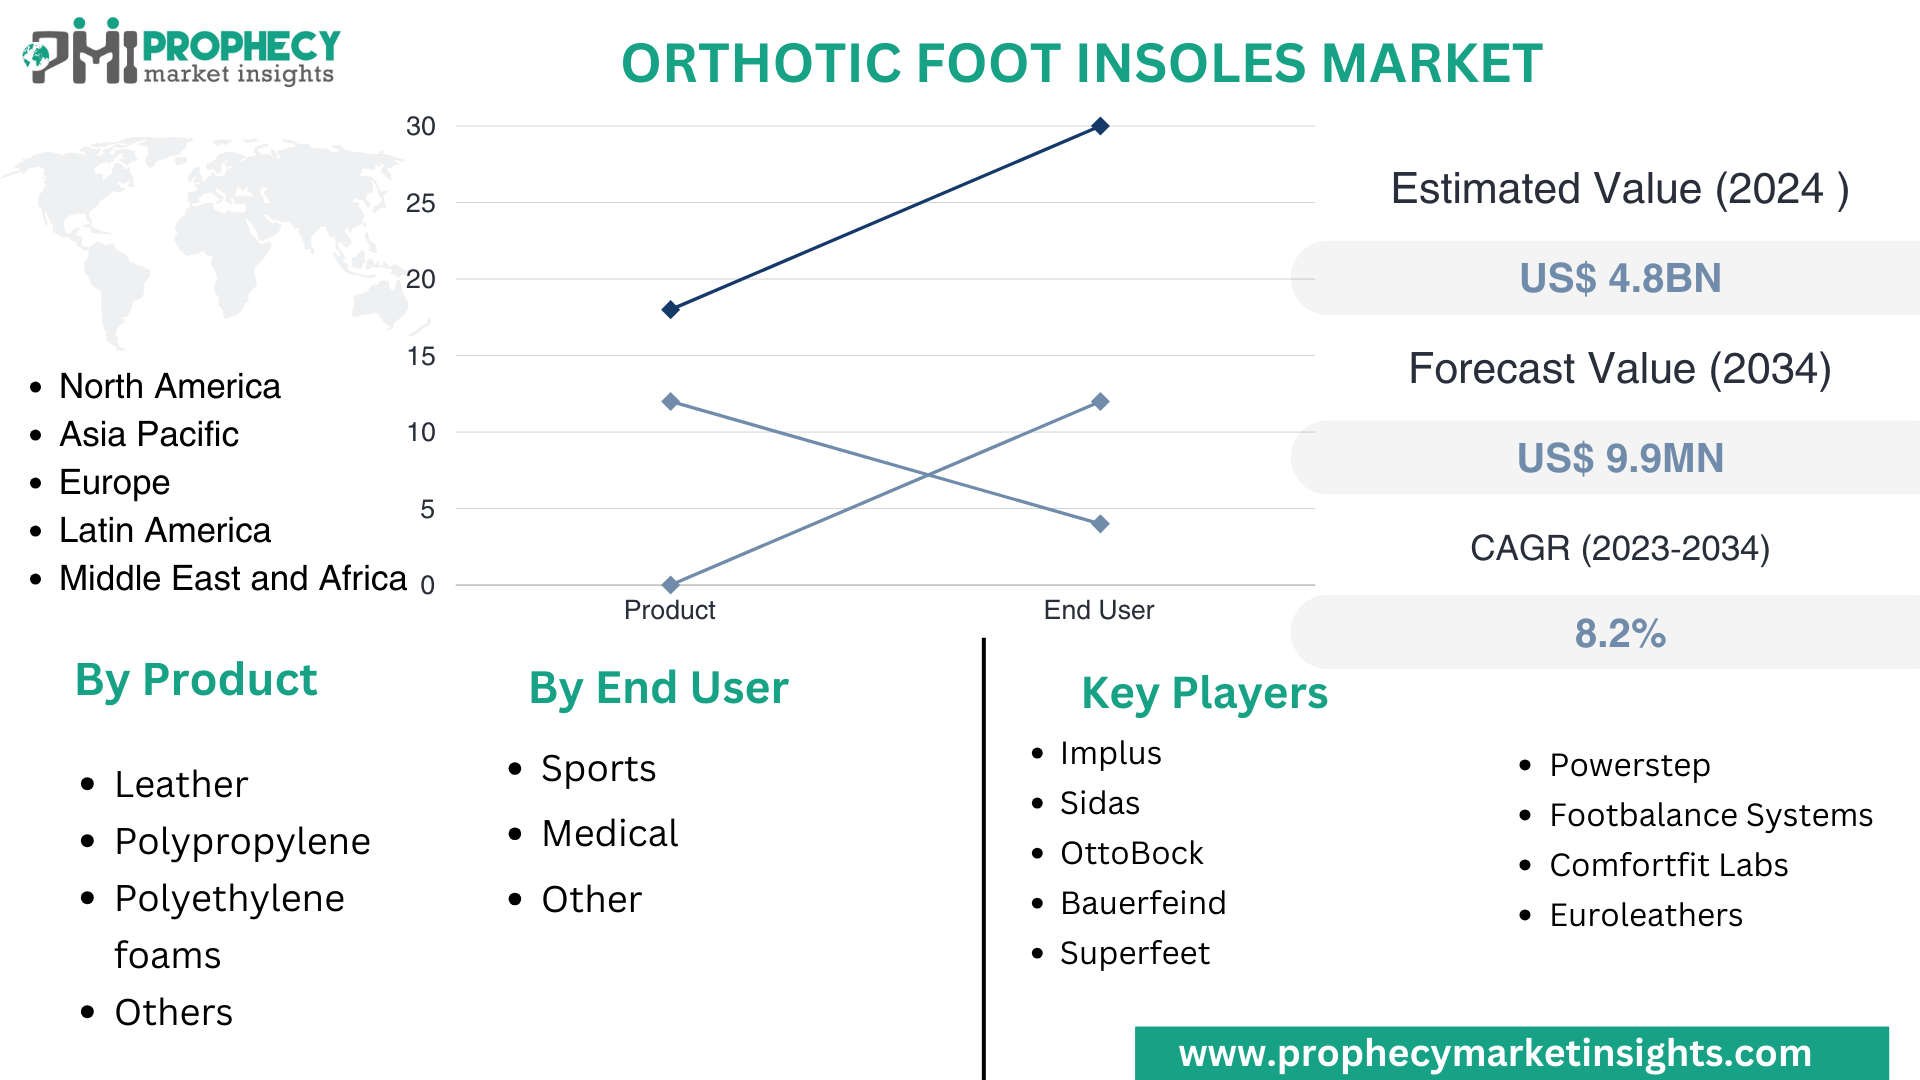 Orthotic Foot Insoles Market